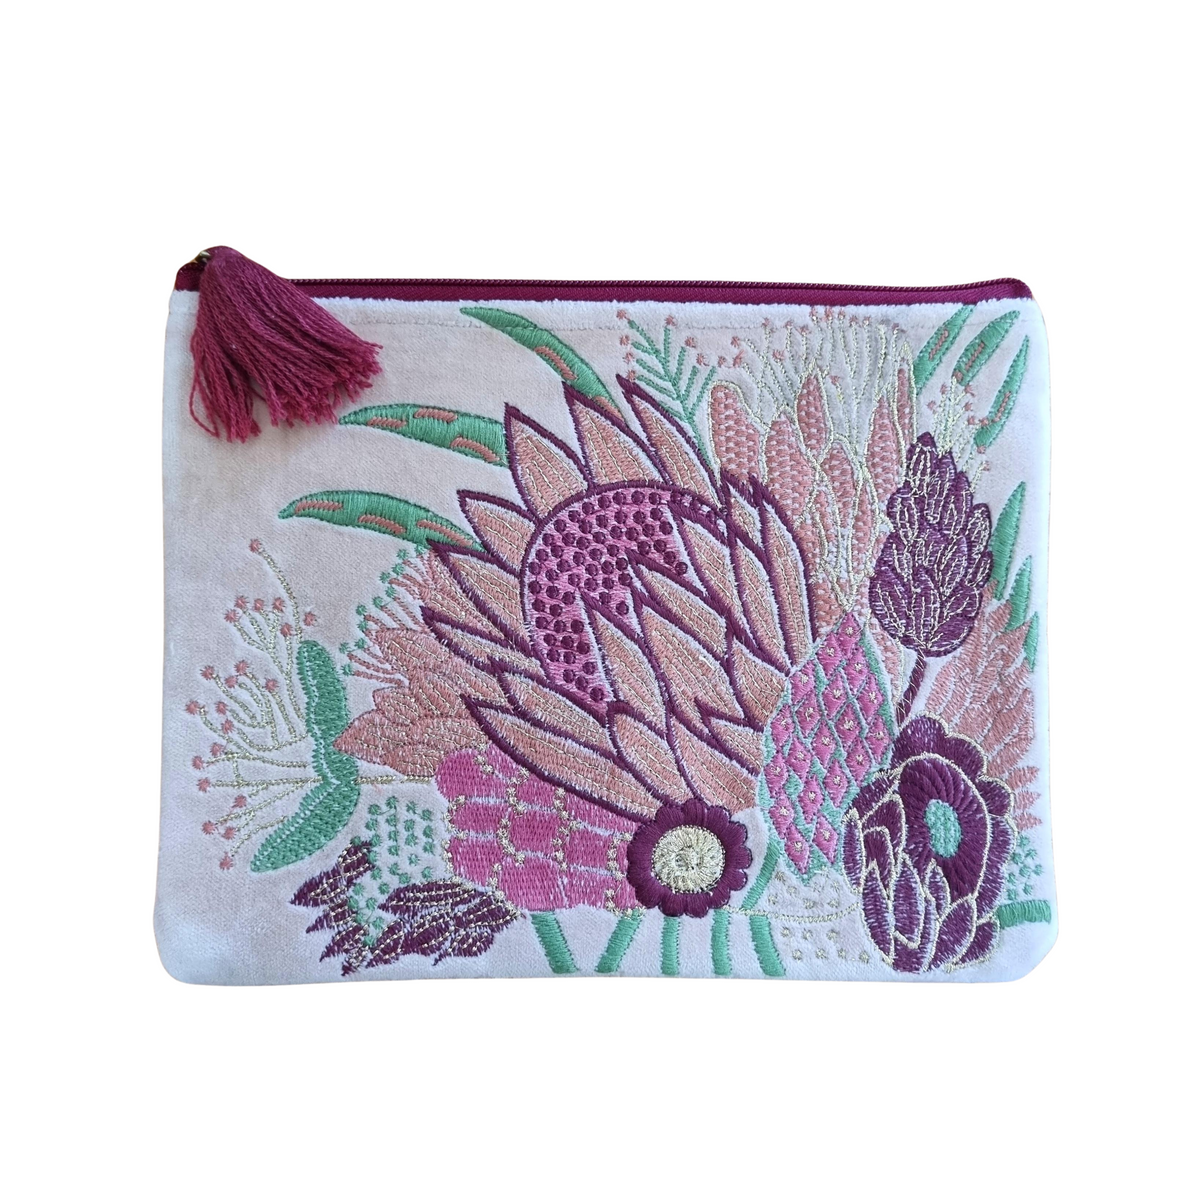 Zoda - Embroidered Velvet Clutch -  Dusty Pink Floral